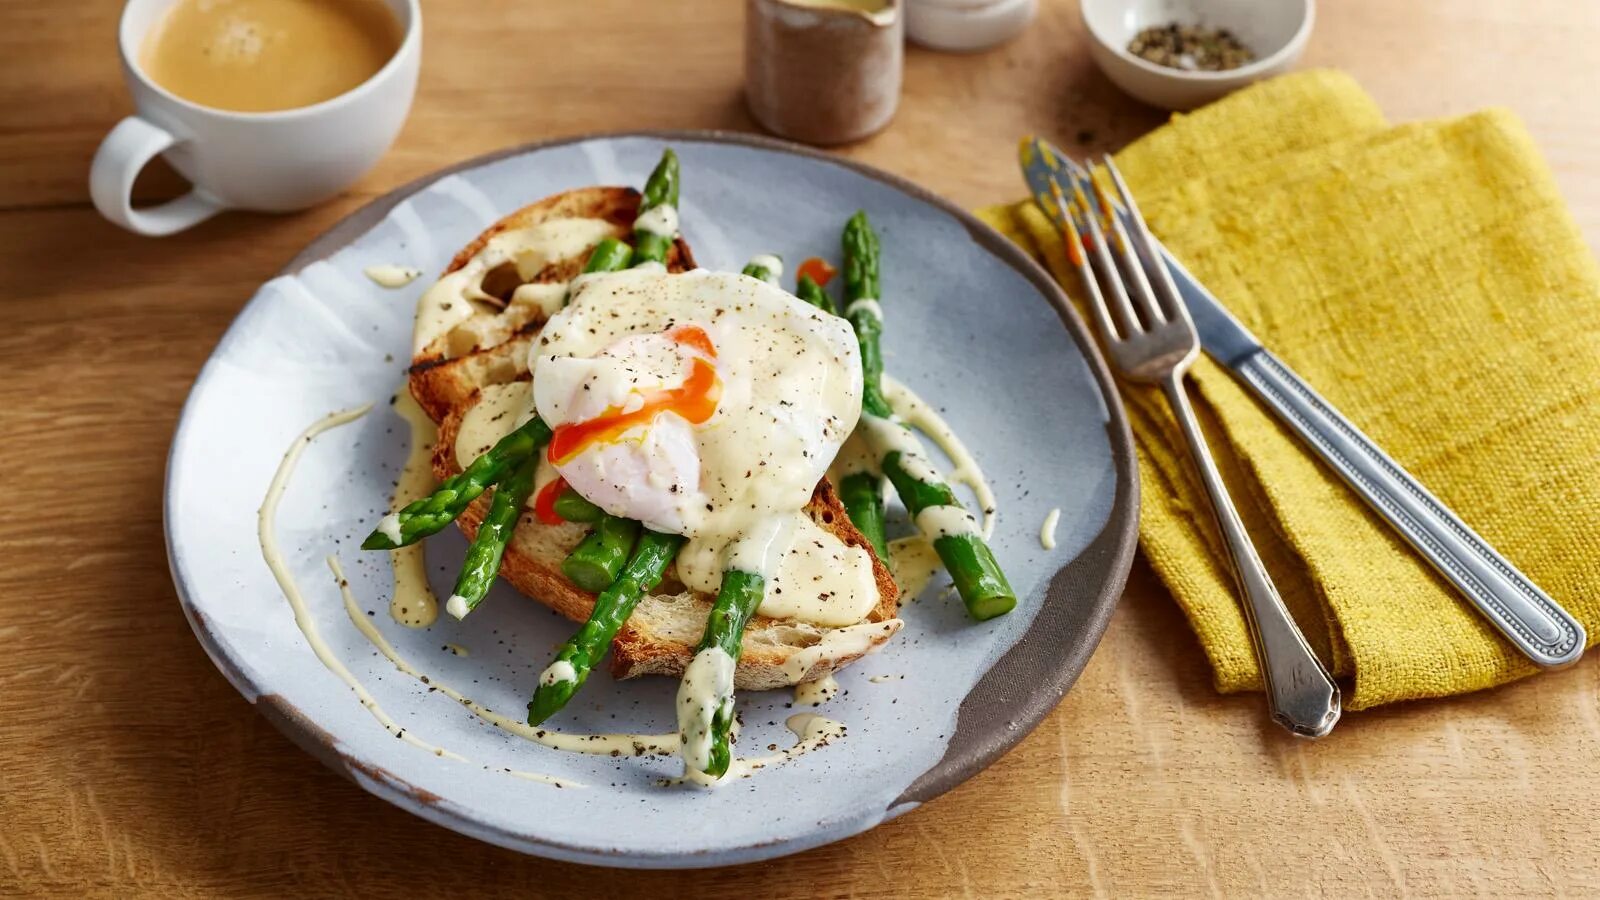 Poached Eggs with Asparagus Recipe. Egg dinner. Poached Eggs with Asparagus Recipe bruthkette.